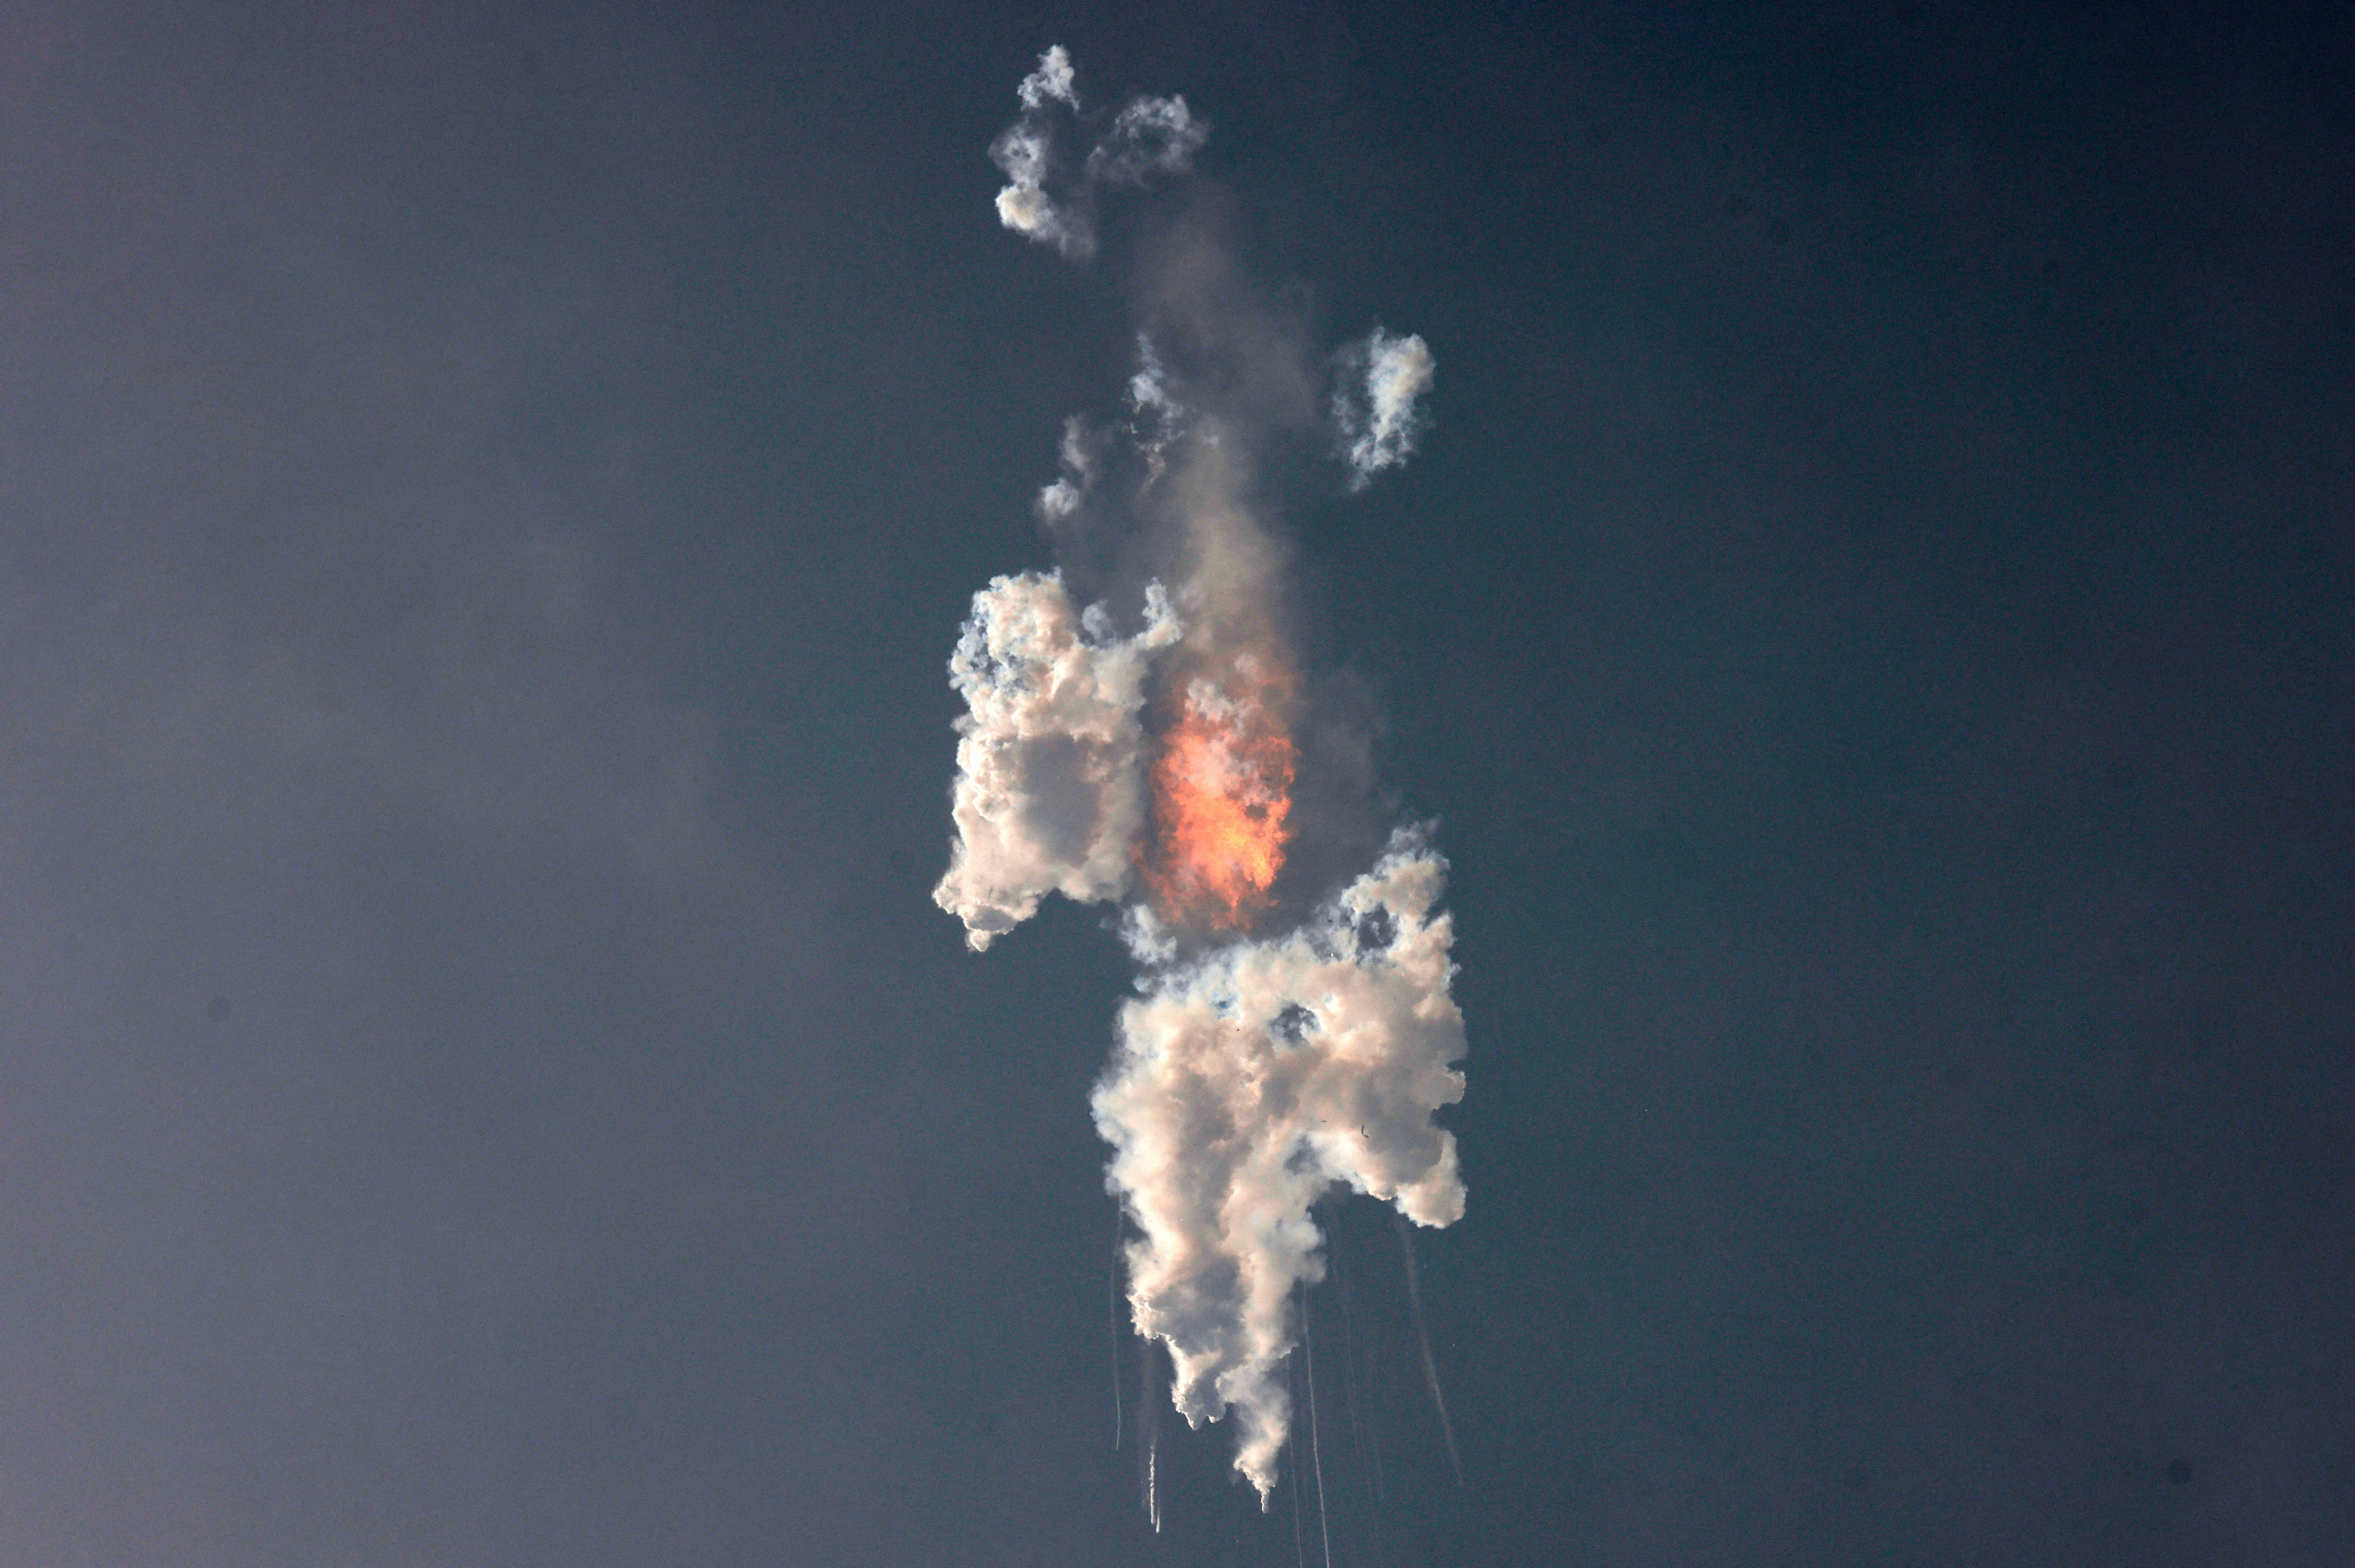 SpaceX’s next-generation Starship spacecraft explodes after its launch